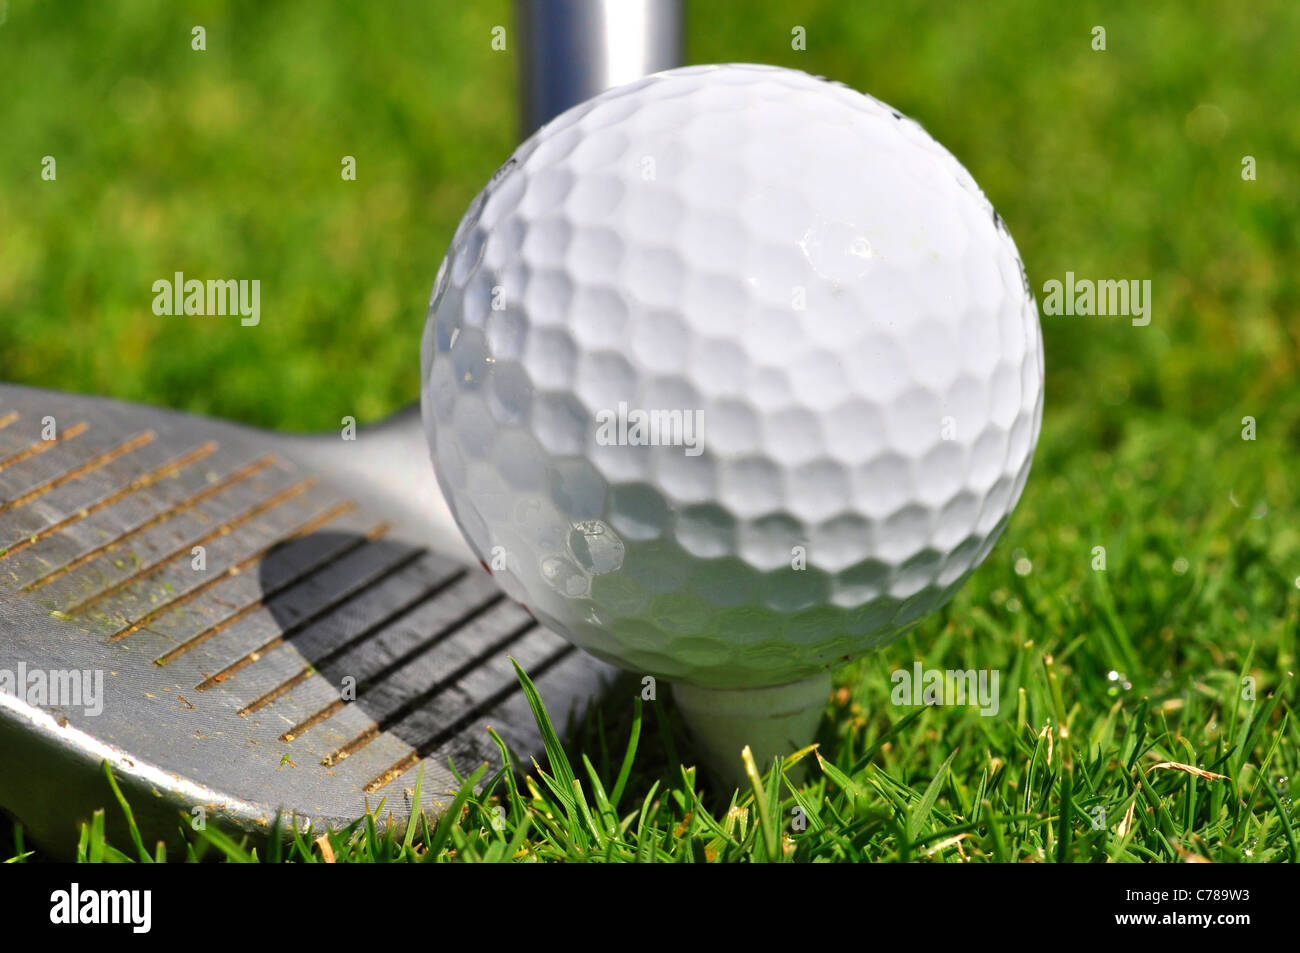 Golf ball and driver, ready to strike Stock Photo